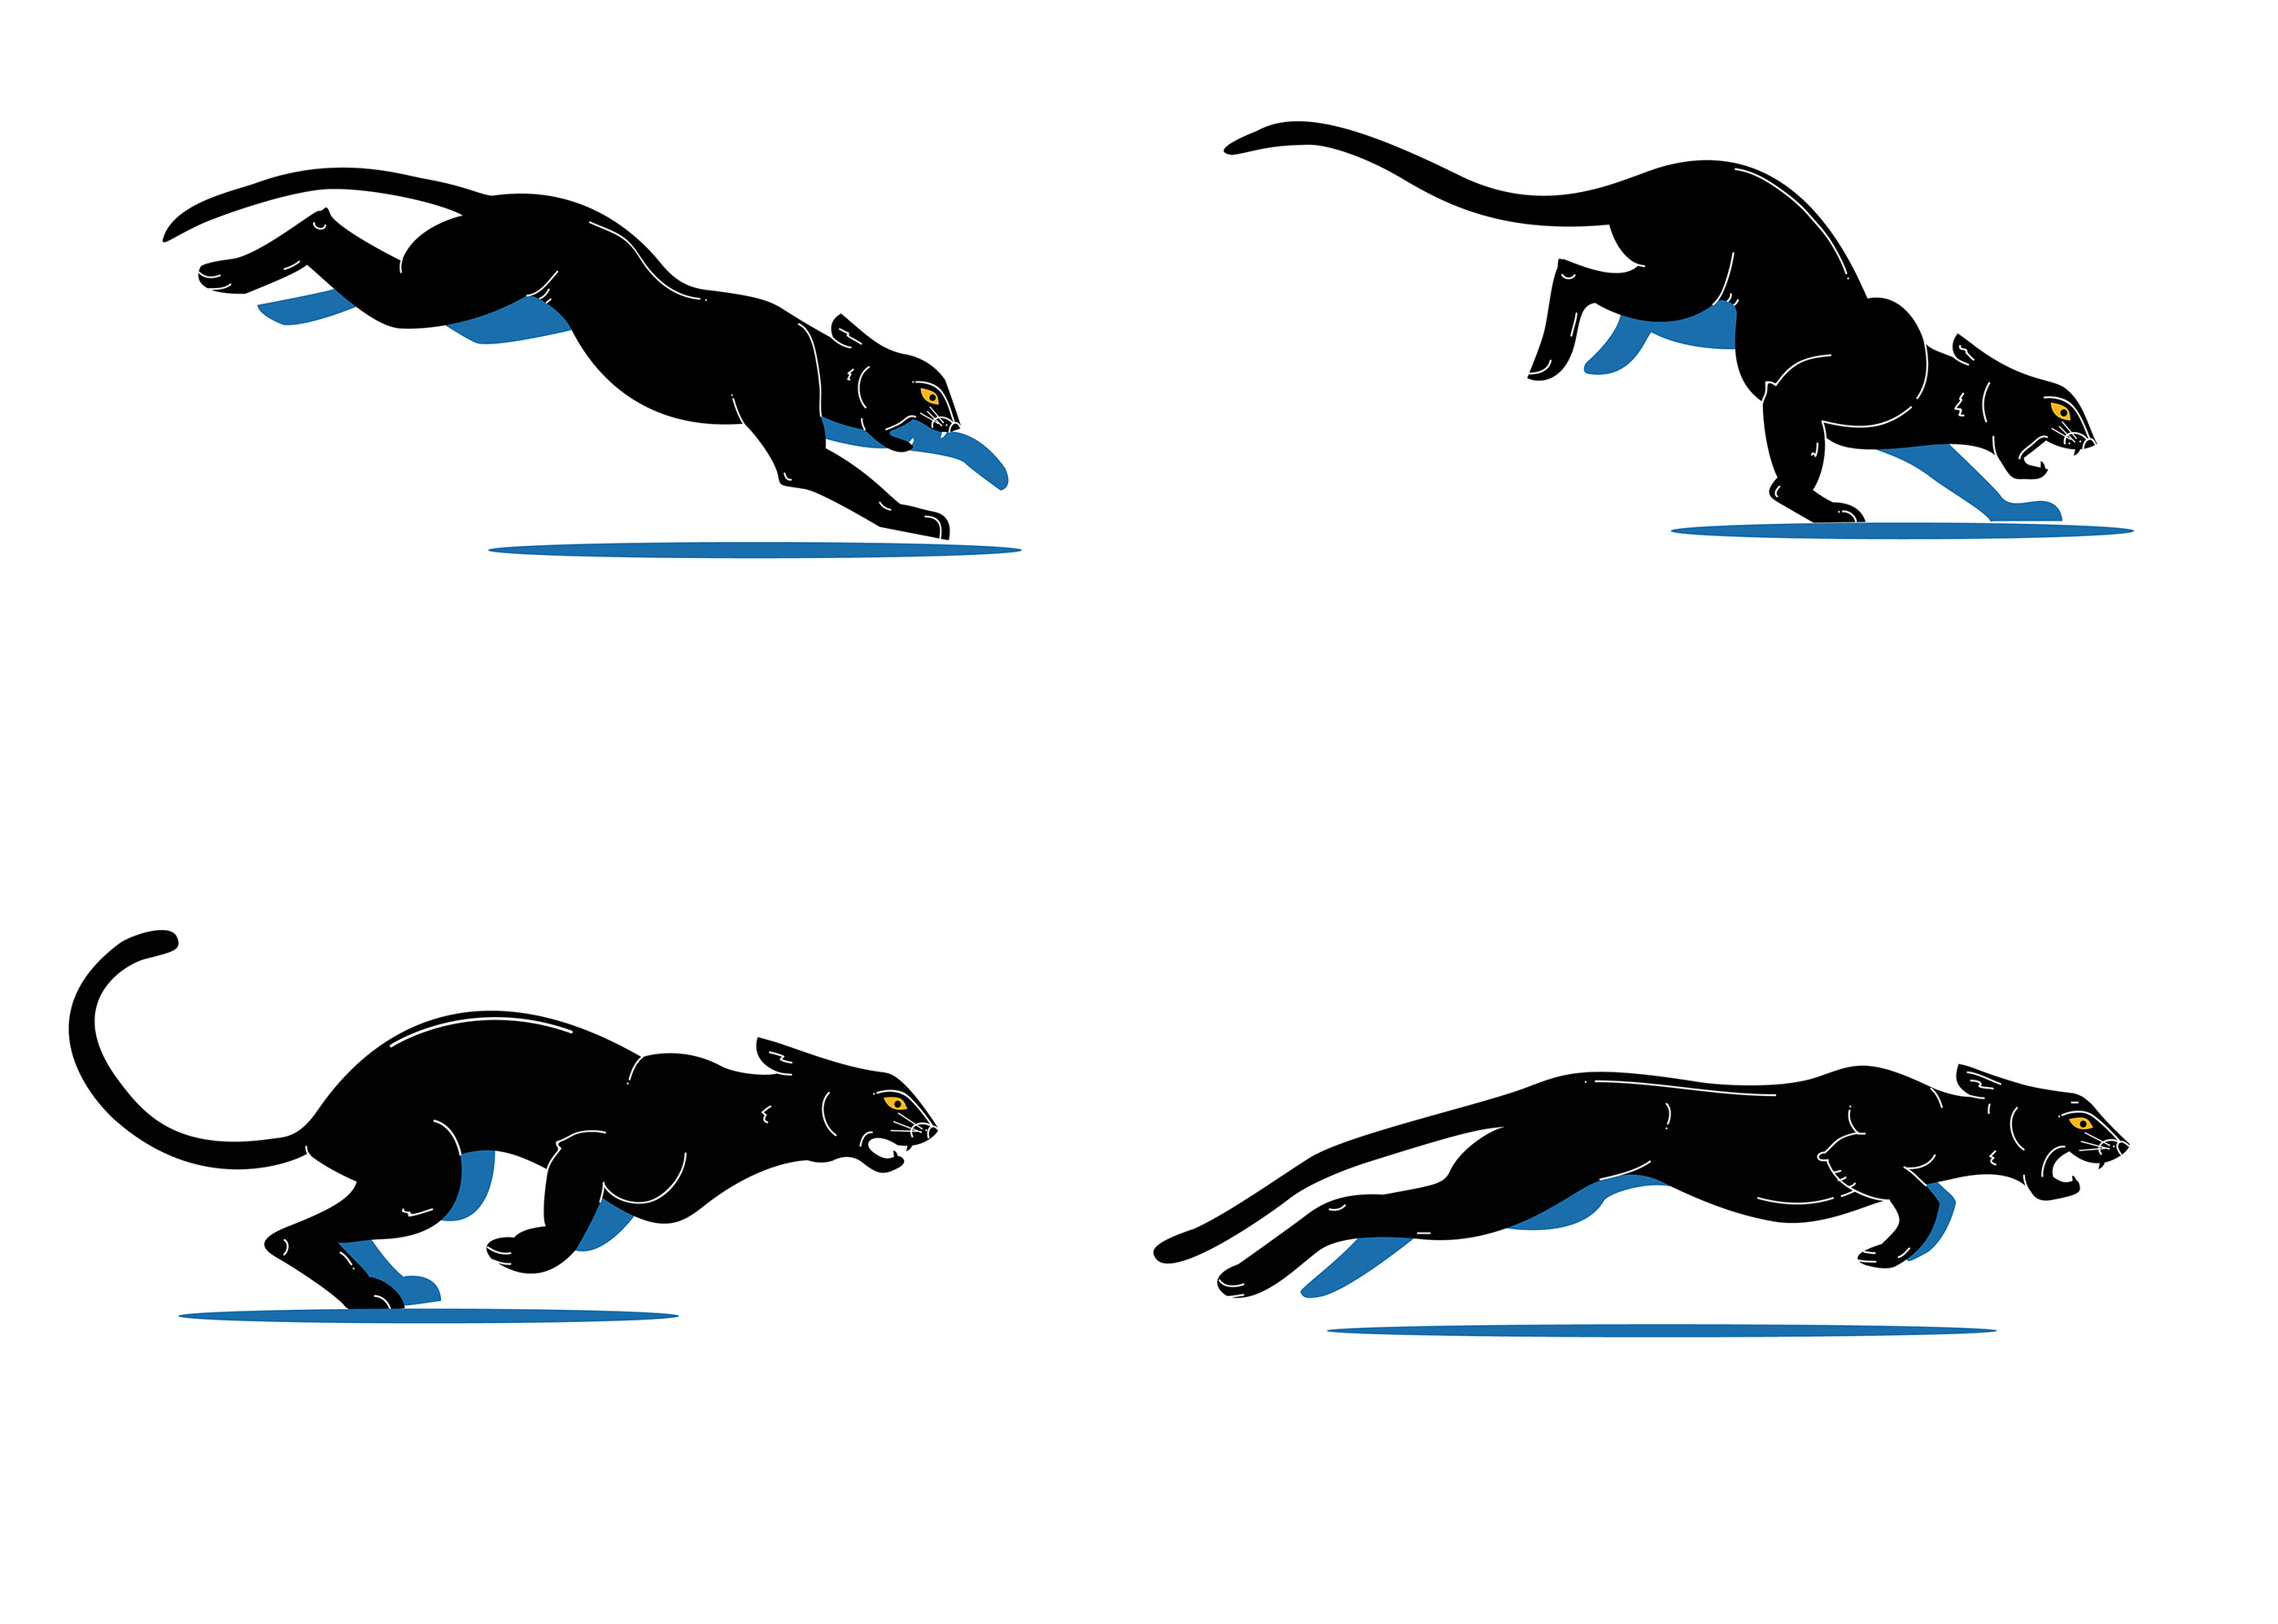 Panther running animation on Behance